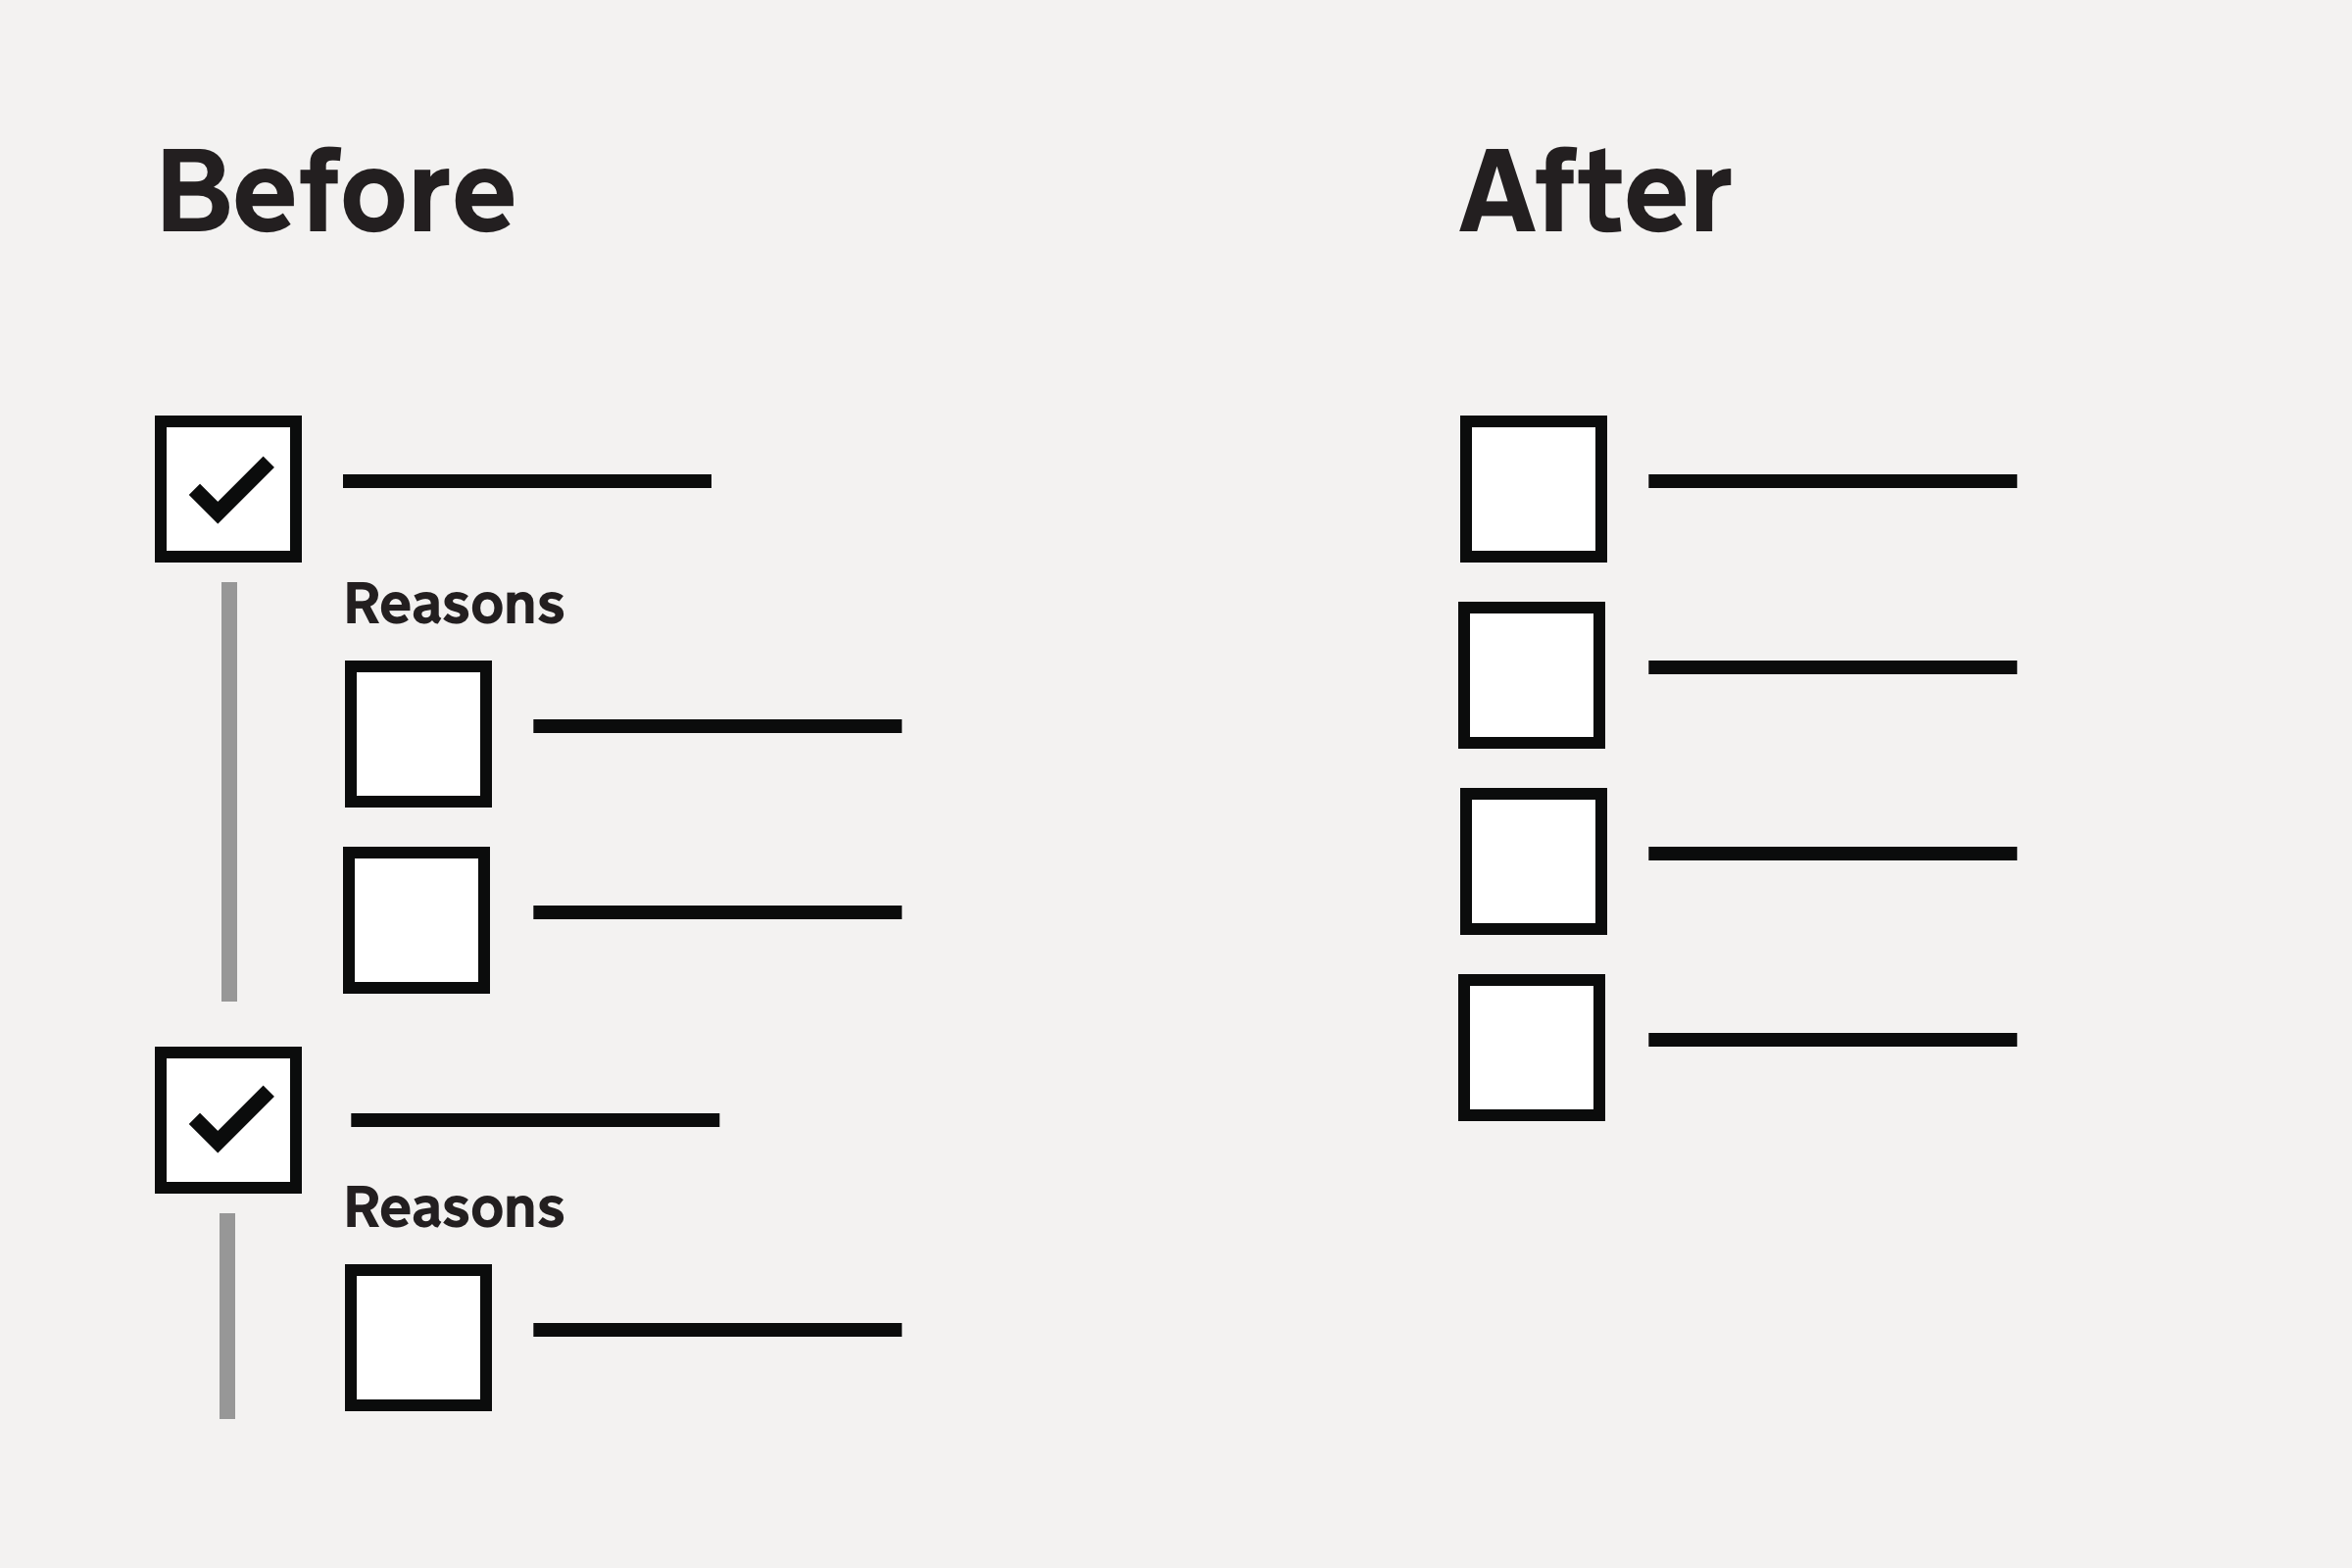 Illustration containing two headings: ‘Before’ and ’After’. Beneath the ‘Before’ heading are two checked boxes, where under each checked box, a ‘Reasons’ sub-heading is shown above some additional unchecked boxes. Beneath the ’After’ heading is just a set of boxes with no nested checkboxes.